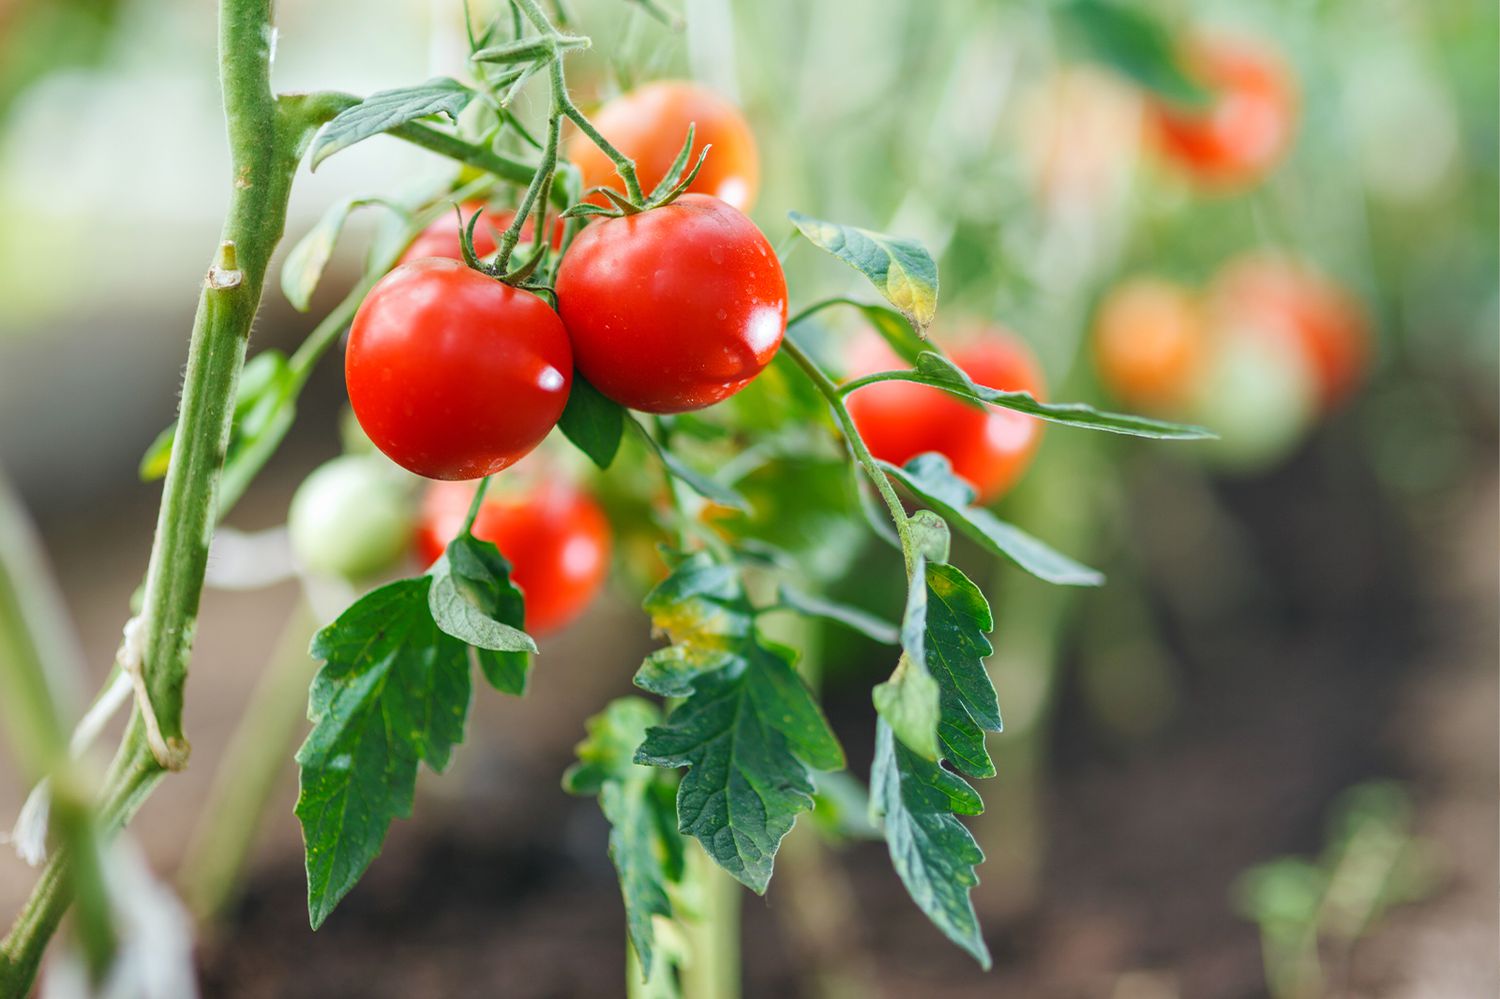 How Long Does It Take To Grow Tomatoes From Seed?